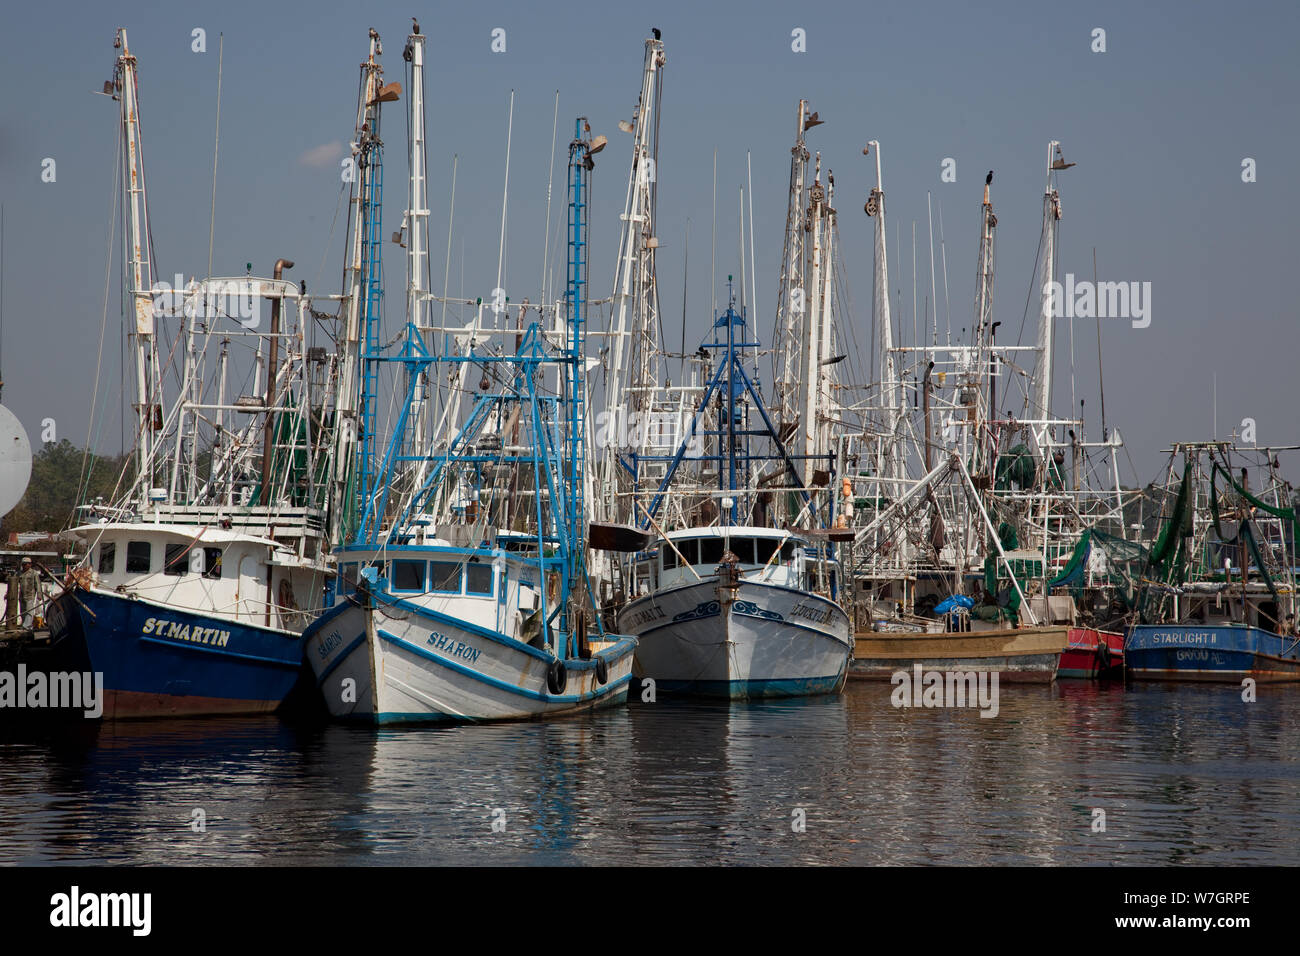 Bayou La Batre, Alabama, is a fishing village with a seafood-processing harbor for fishing boats and shrimp boats Stock Photo